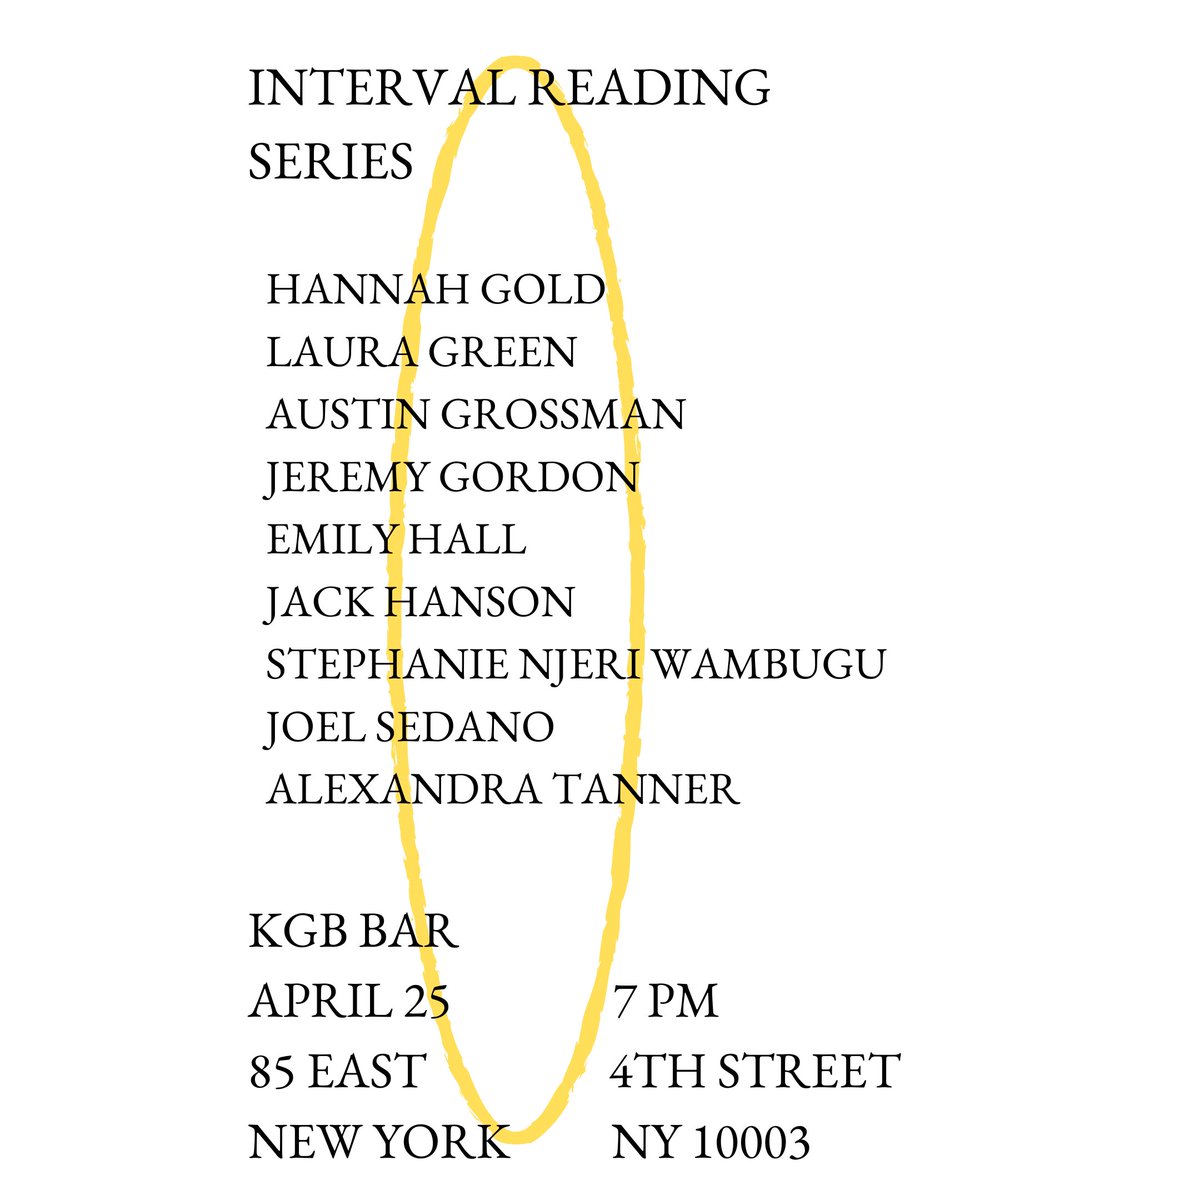 We're back! The next Interval Series event will take place on Thursday, 4/25, at @kgbbarlitmag with readings from @jeremypgordon @alex___tanner @emilyhallnyc @j_ckh_ns_n @hannahpgold and more! Doors at 7, Readings 7:30. Free!